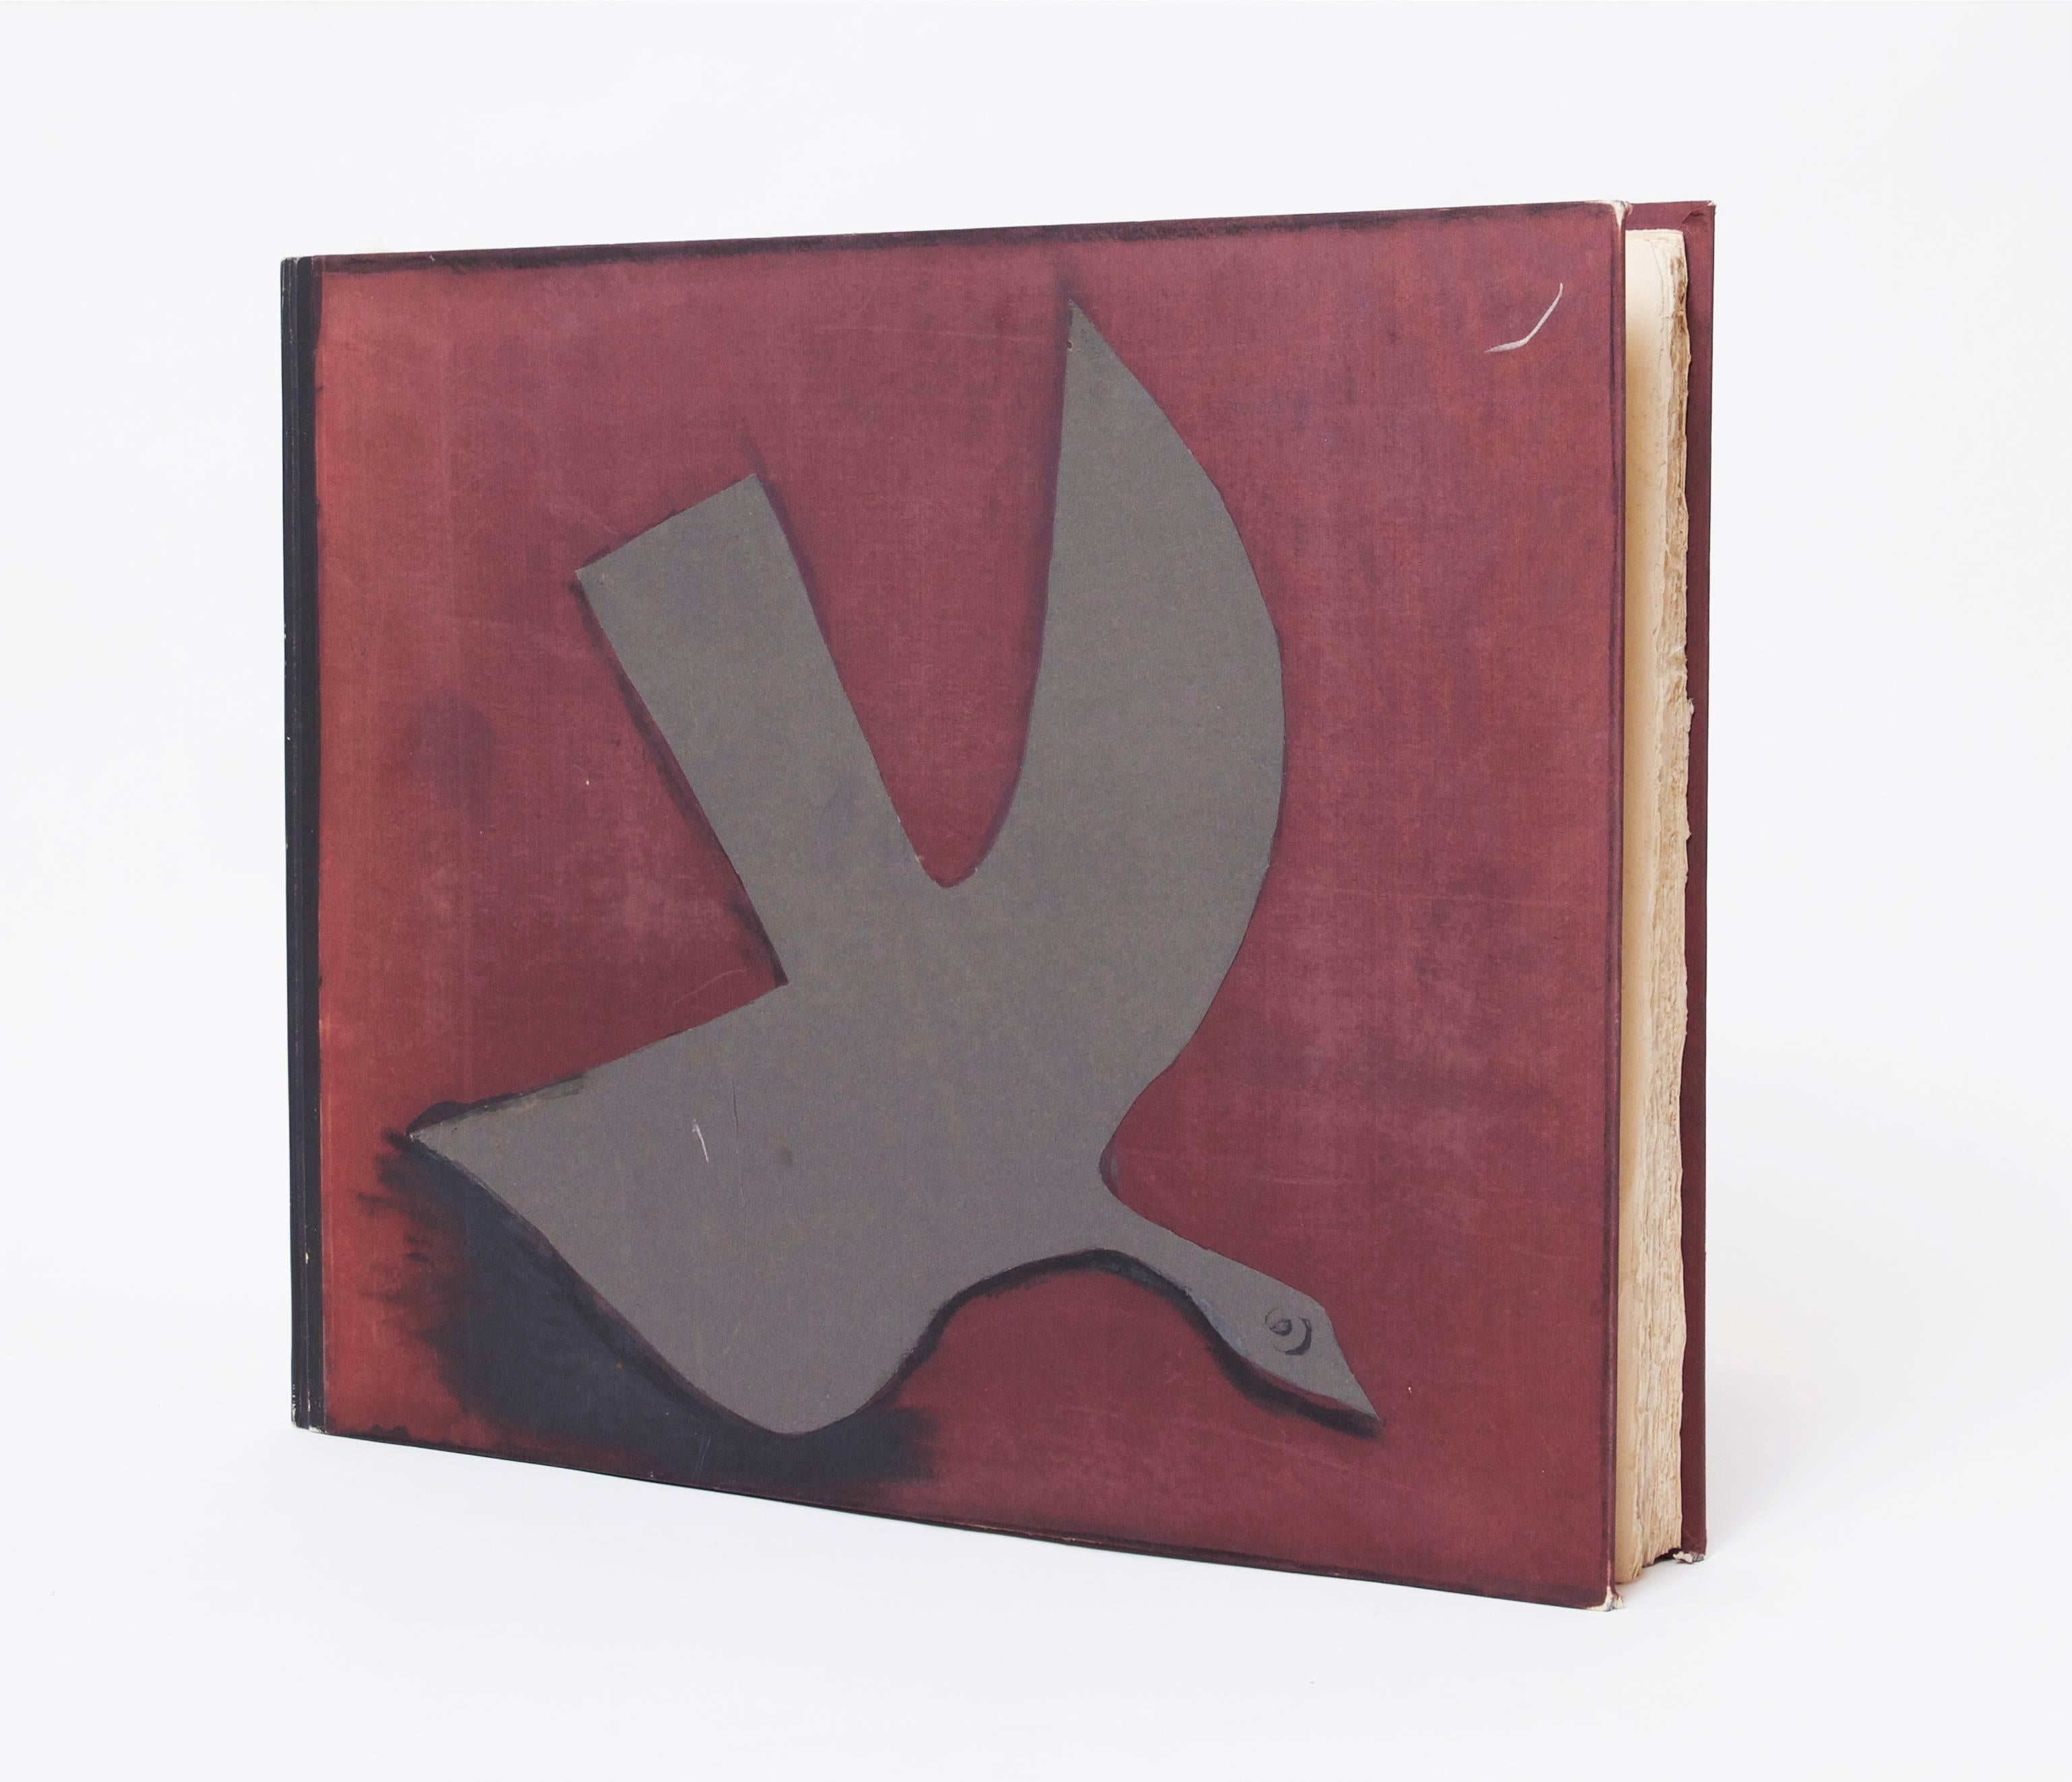 Extremely rare set of Georges Braque archives maquettes books and lithographs created with the publisher 'Au Vent d'Arles', Paris.
The set is composed with:
- L'Ordre des Oiseaux ( Georges Braque and Saint-John Perse, 'Au Vent d'Arles', Paris,